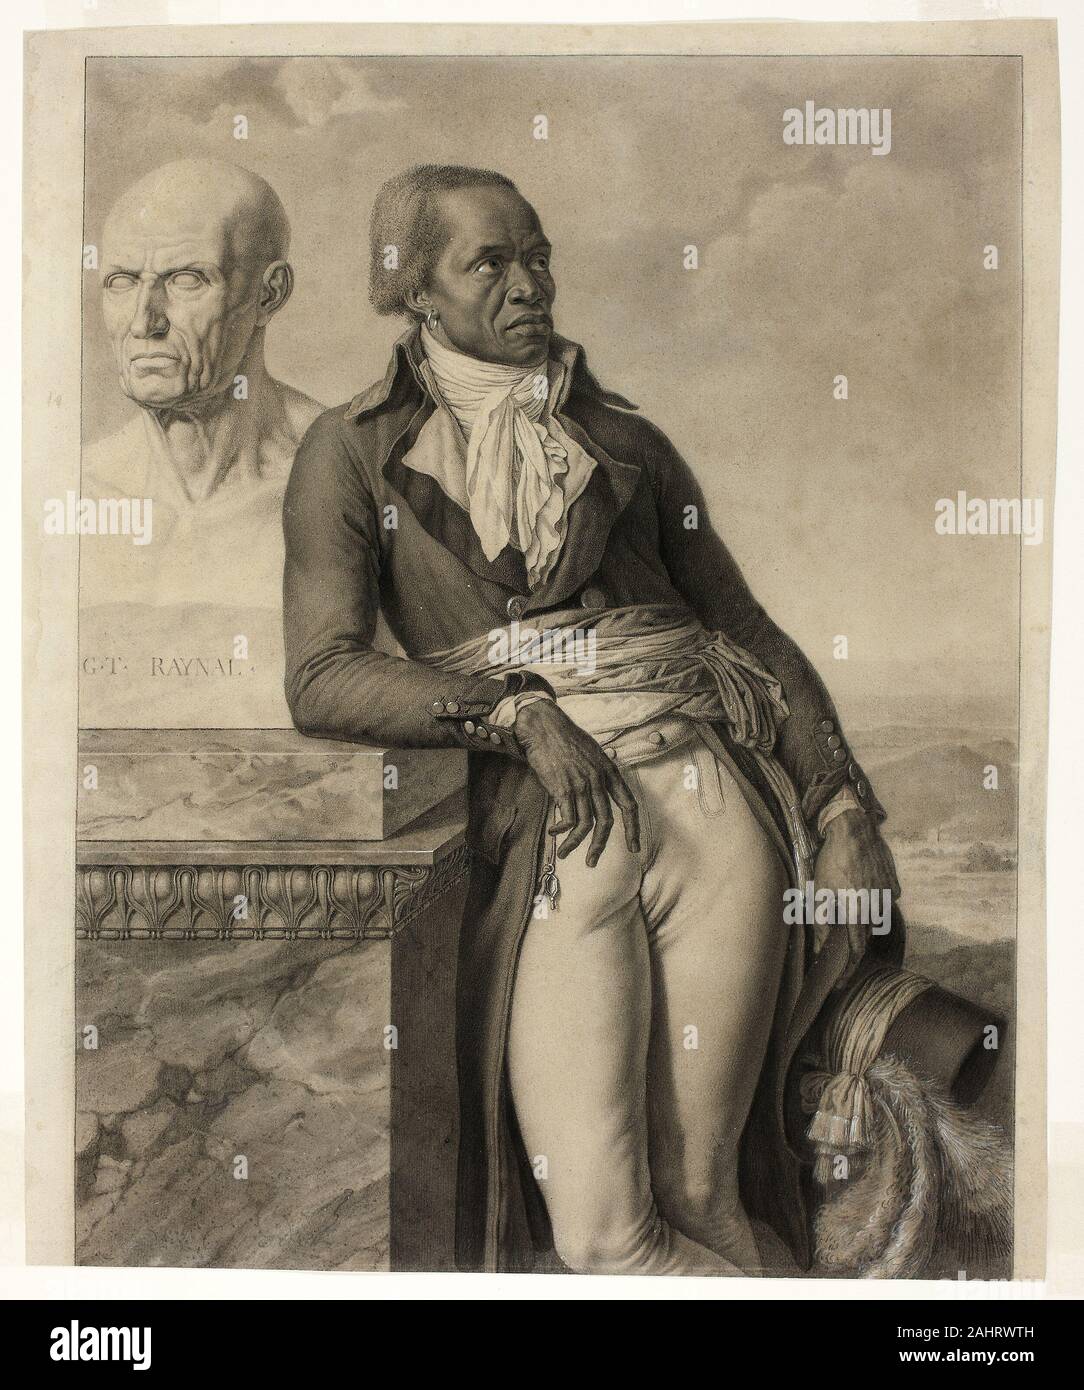 Anne-Louis Girodet de Roussy-Trioson. Jean-Baptiste Belley. 1787–1824. France. Black chalk, with stumping, and traces of pen and black ink, heightened with touches of opaque white, on ivory wove paper Sold into slavery as a boy, Jean-Baptiste Belley (1746–1805) bought his freedom in 1764. Belley fought in the American War of Independence and served as a captain in the French army during the Haitian Revolution (1791–1804) fighting to abolish slavery on the island of Saint-Domingue (now Hispaniola). In 1793 he was elected to the National Convention in Paris, becoming its first black deputy.Belle Stock Photo